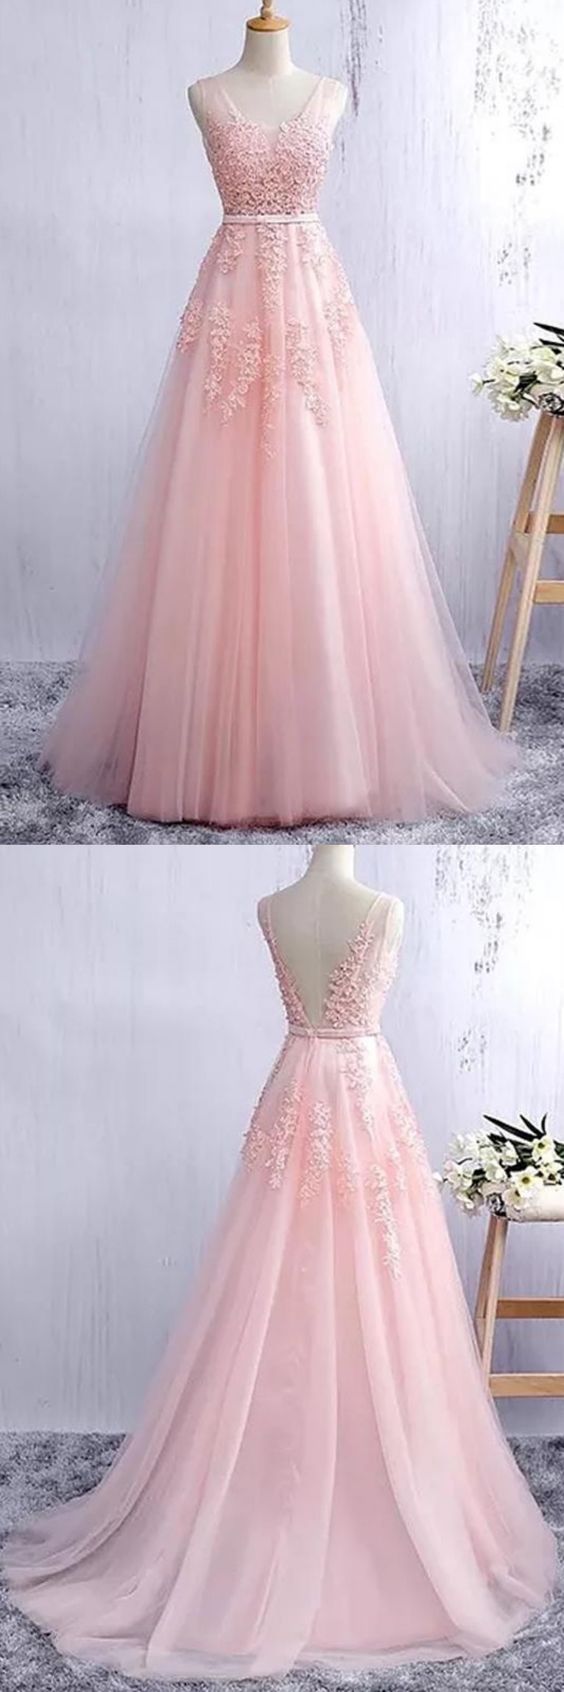 Pink Prom Dress A-line Party Senior Graduation Formal Gown ,GDC1155-Dolly Gown